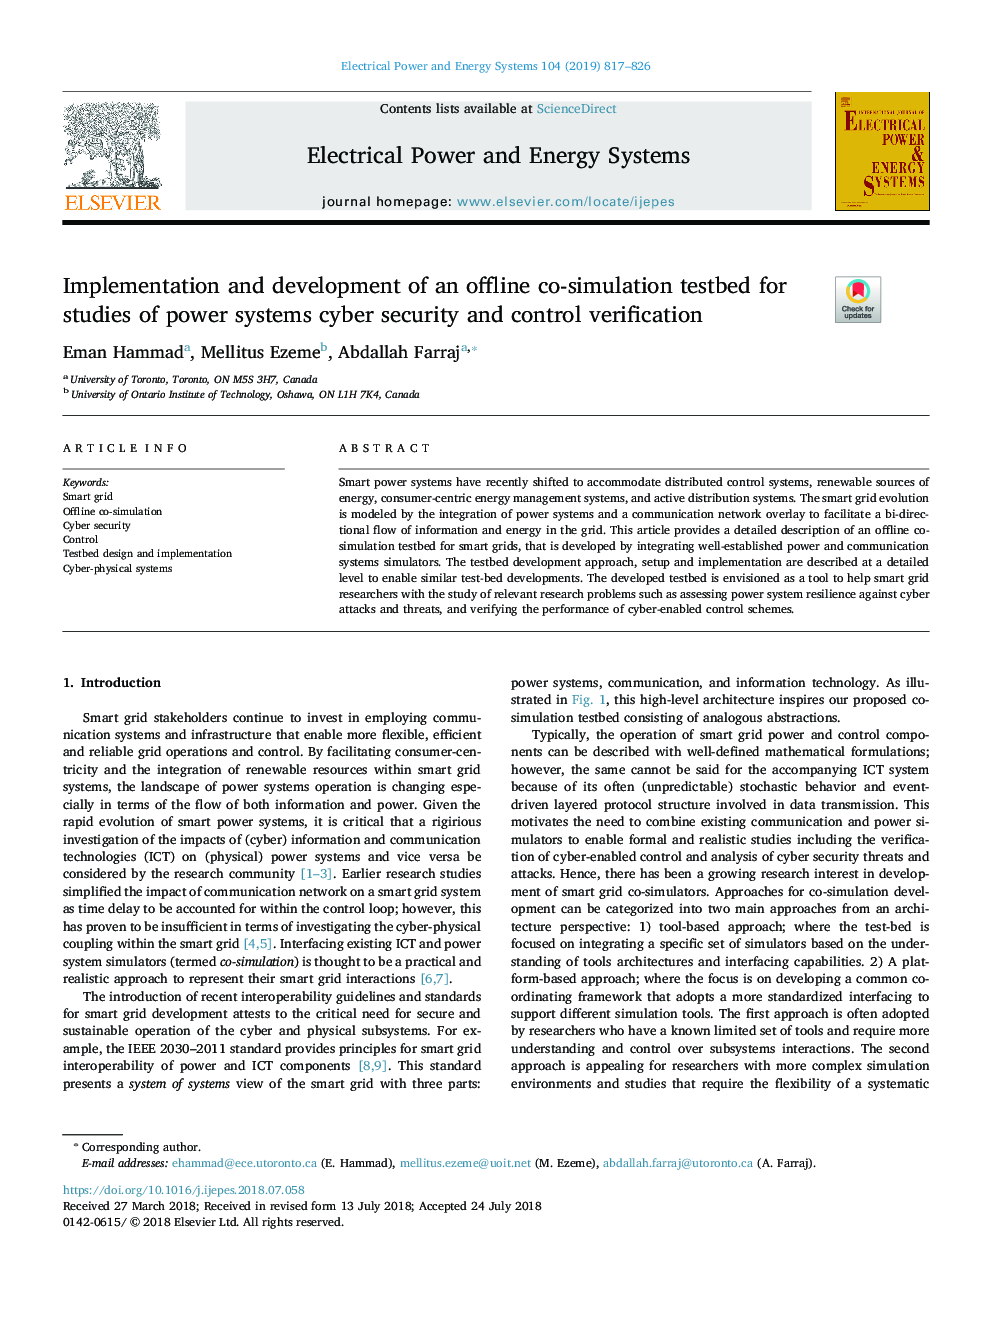 Implementation and development of an offline co-simulation testbed for studies of power systems cyber security and control verification